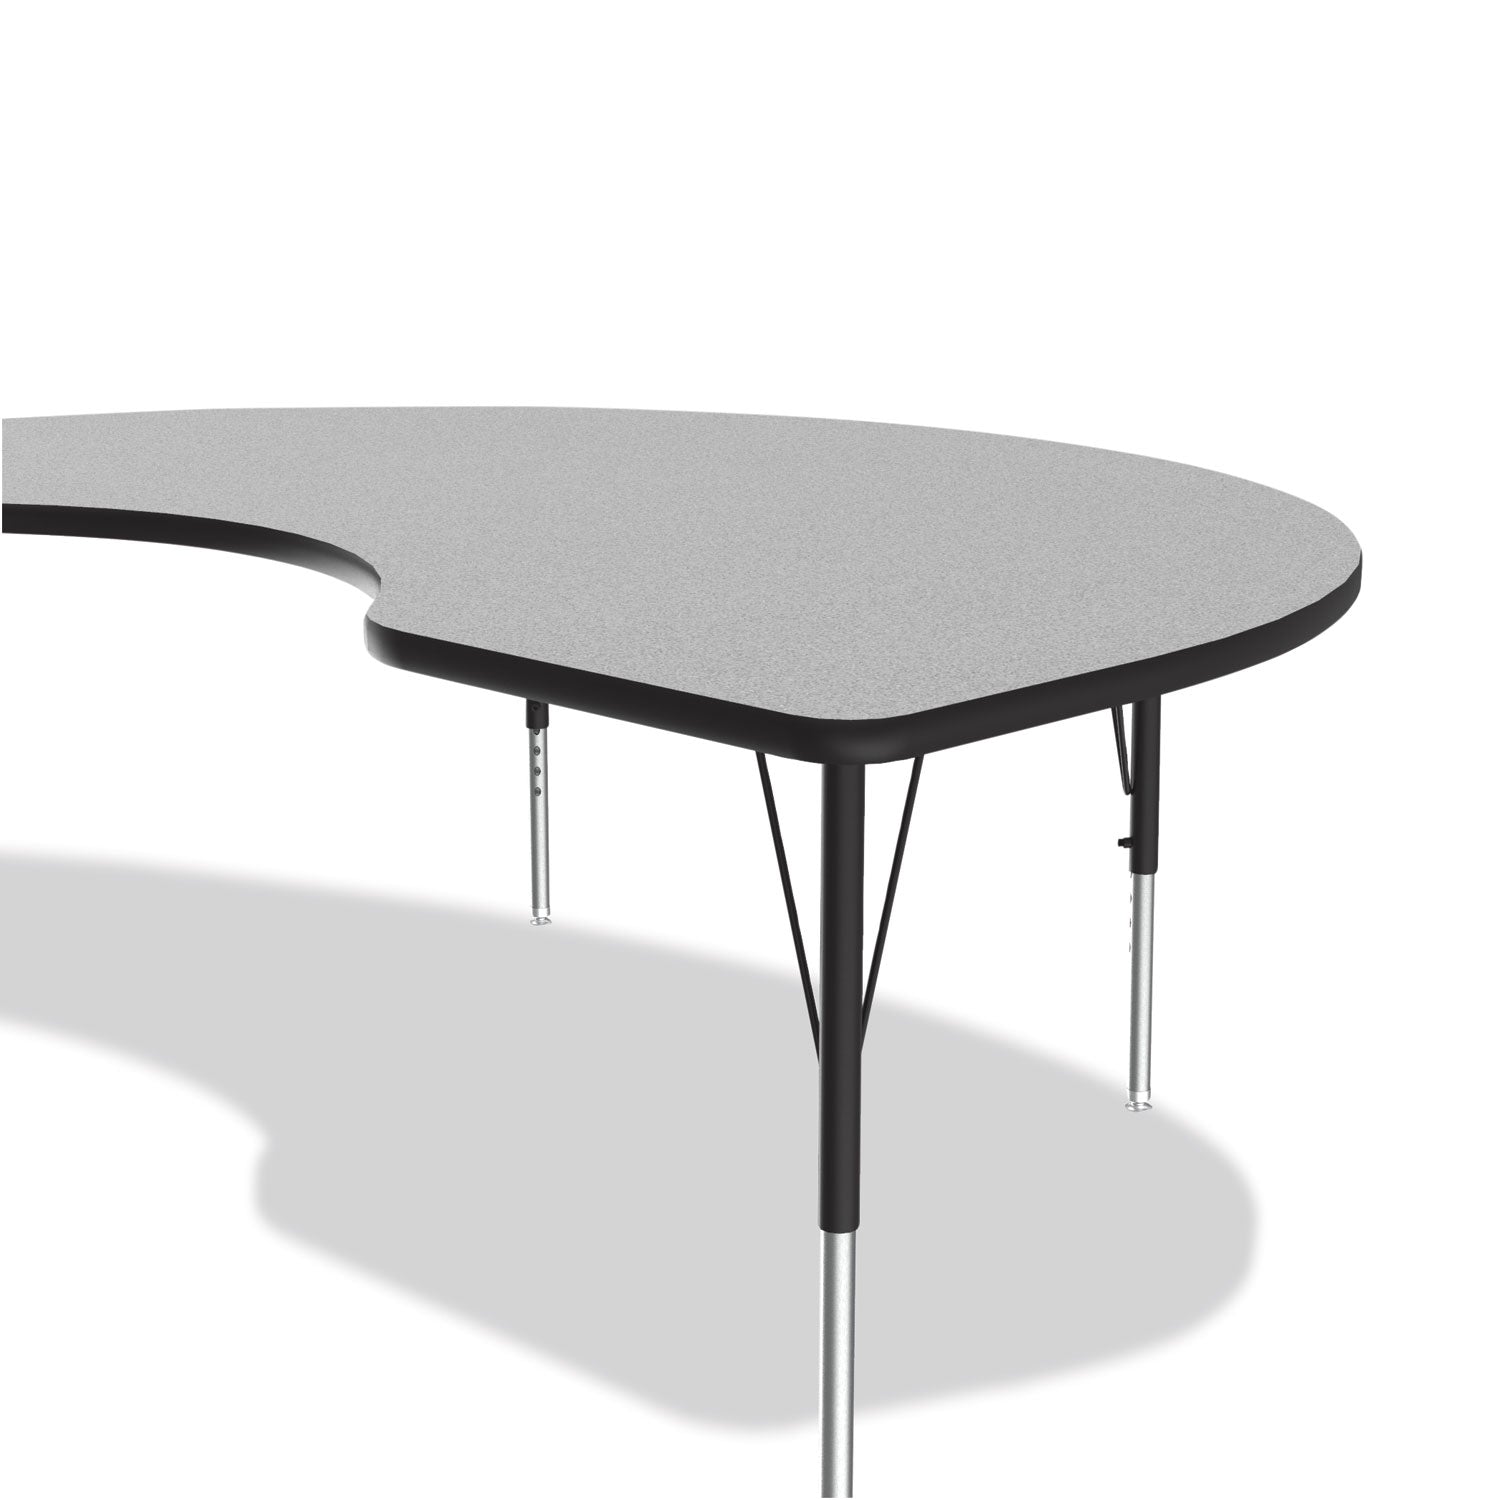 adjustable-activity-tables-kidney-shaped-72-x-48-x-19-to-29-gray-top-black-legs-4-pallet-ships-in-4-6-business-days_crl4872tf1595k4 - 8